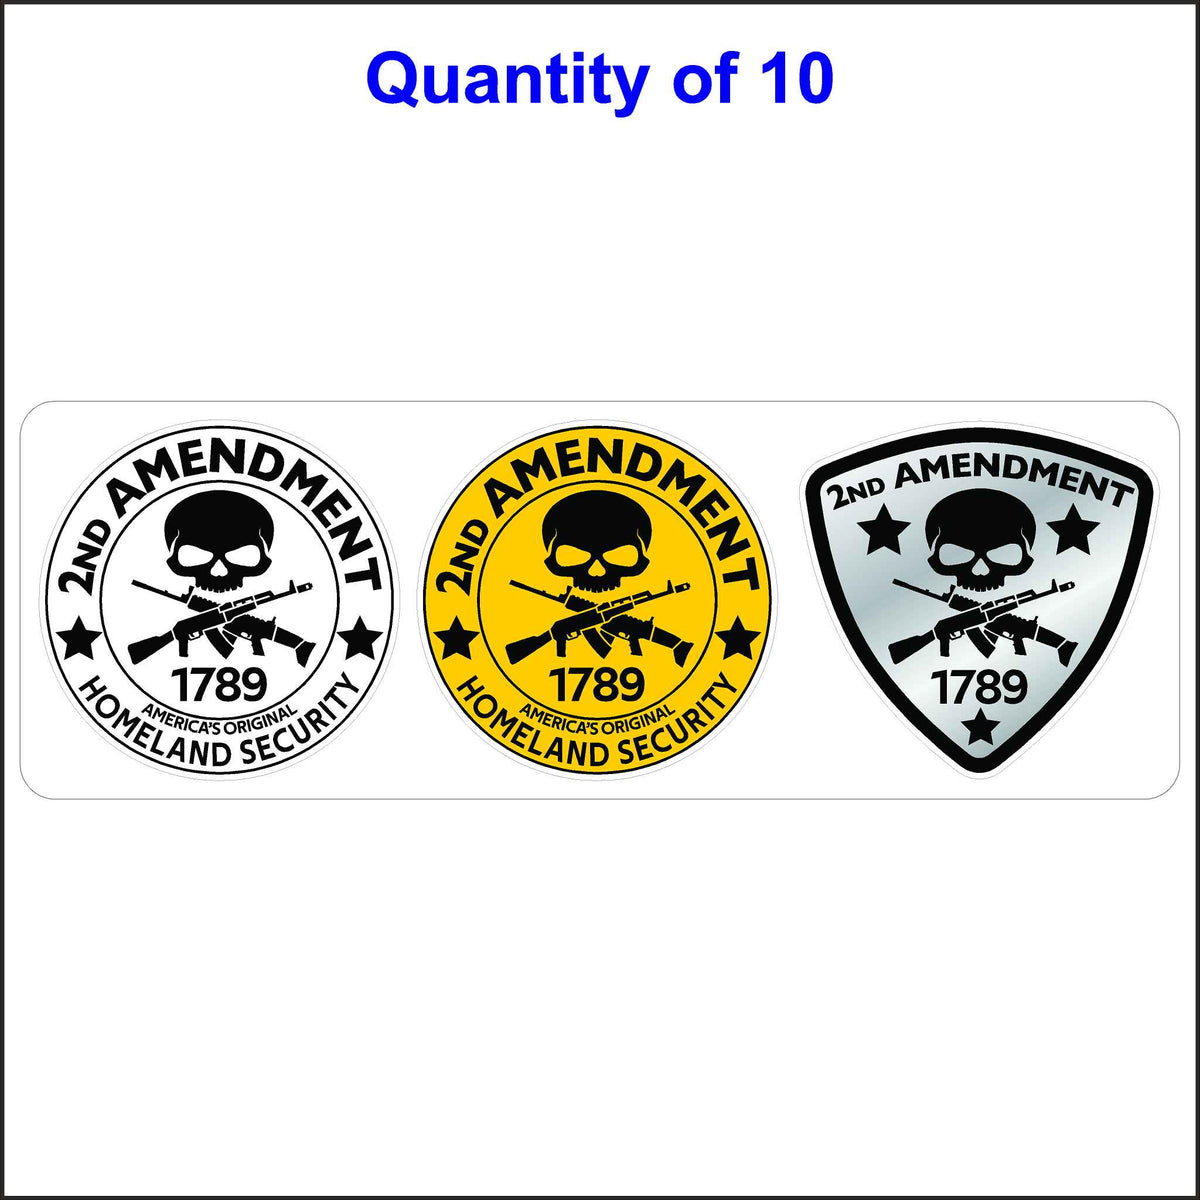 Second Amendment Sticker With Skulls 3 Pack. 3 Different 2nd Amendment Stickers One of Each in White, Yellow and Gray All With Black Letters. Quantity of 10, 3 packs.